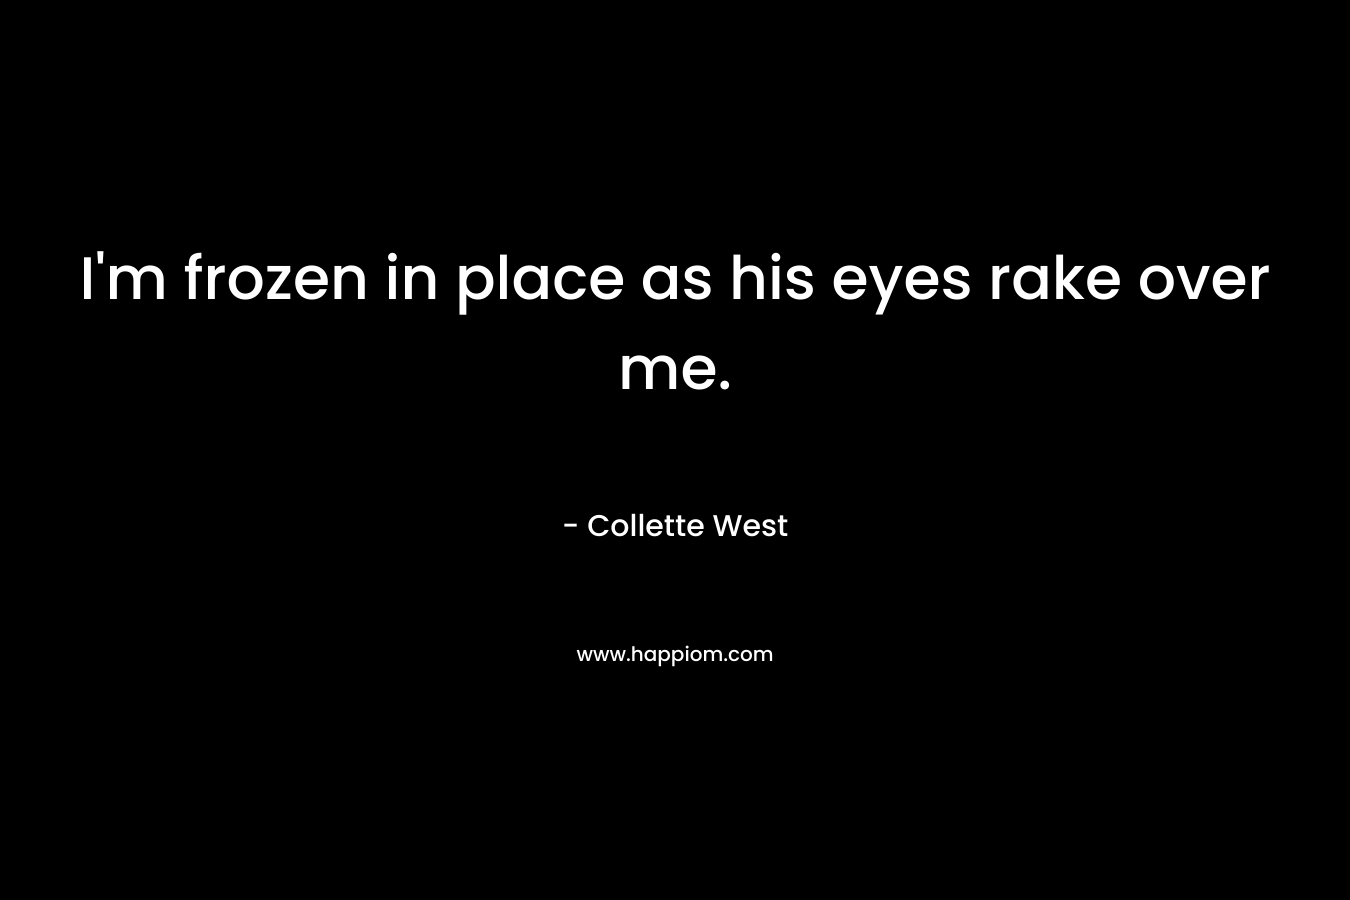 I’m frozen in place as his eyes rake over me. – Collette West